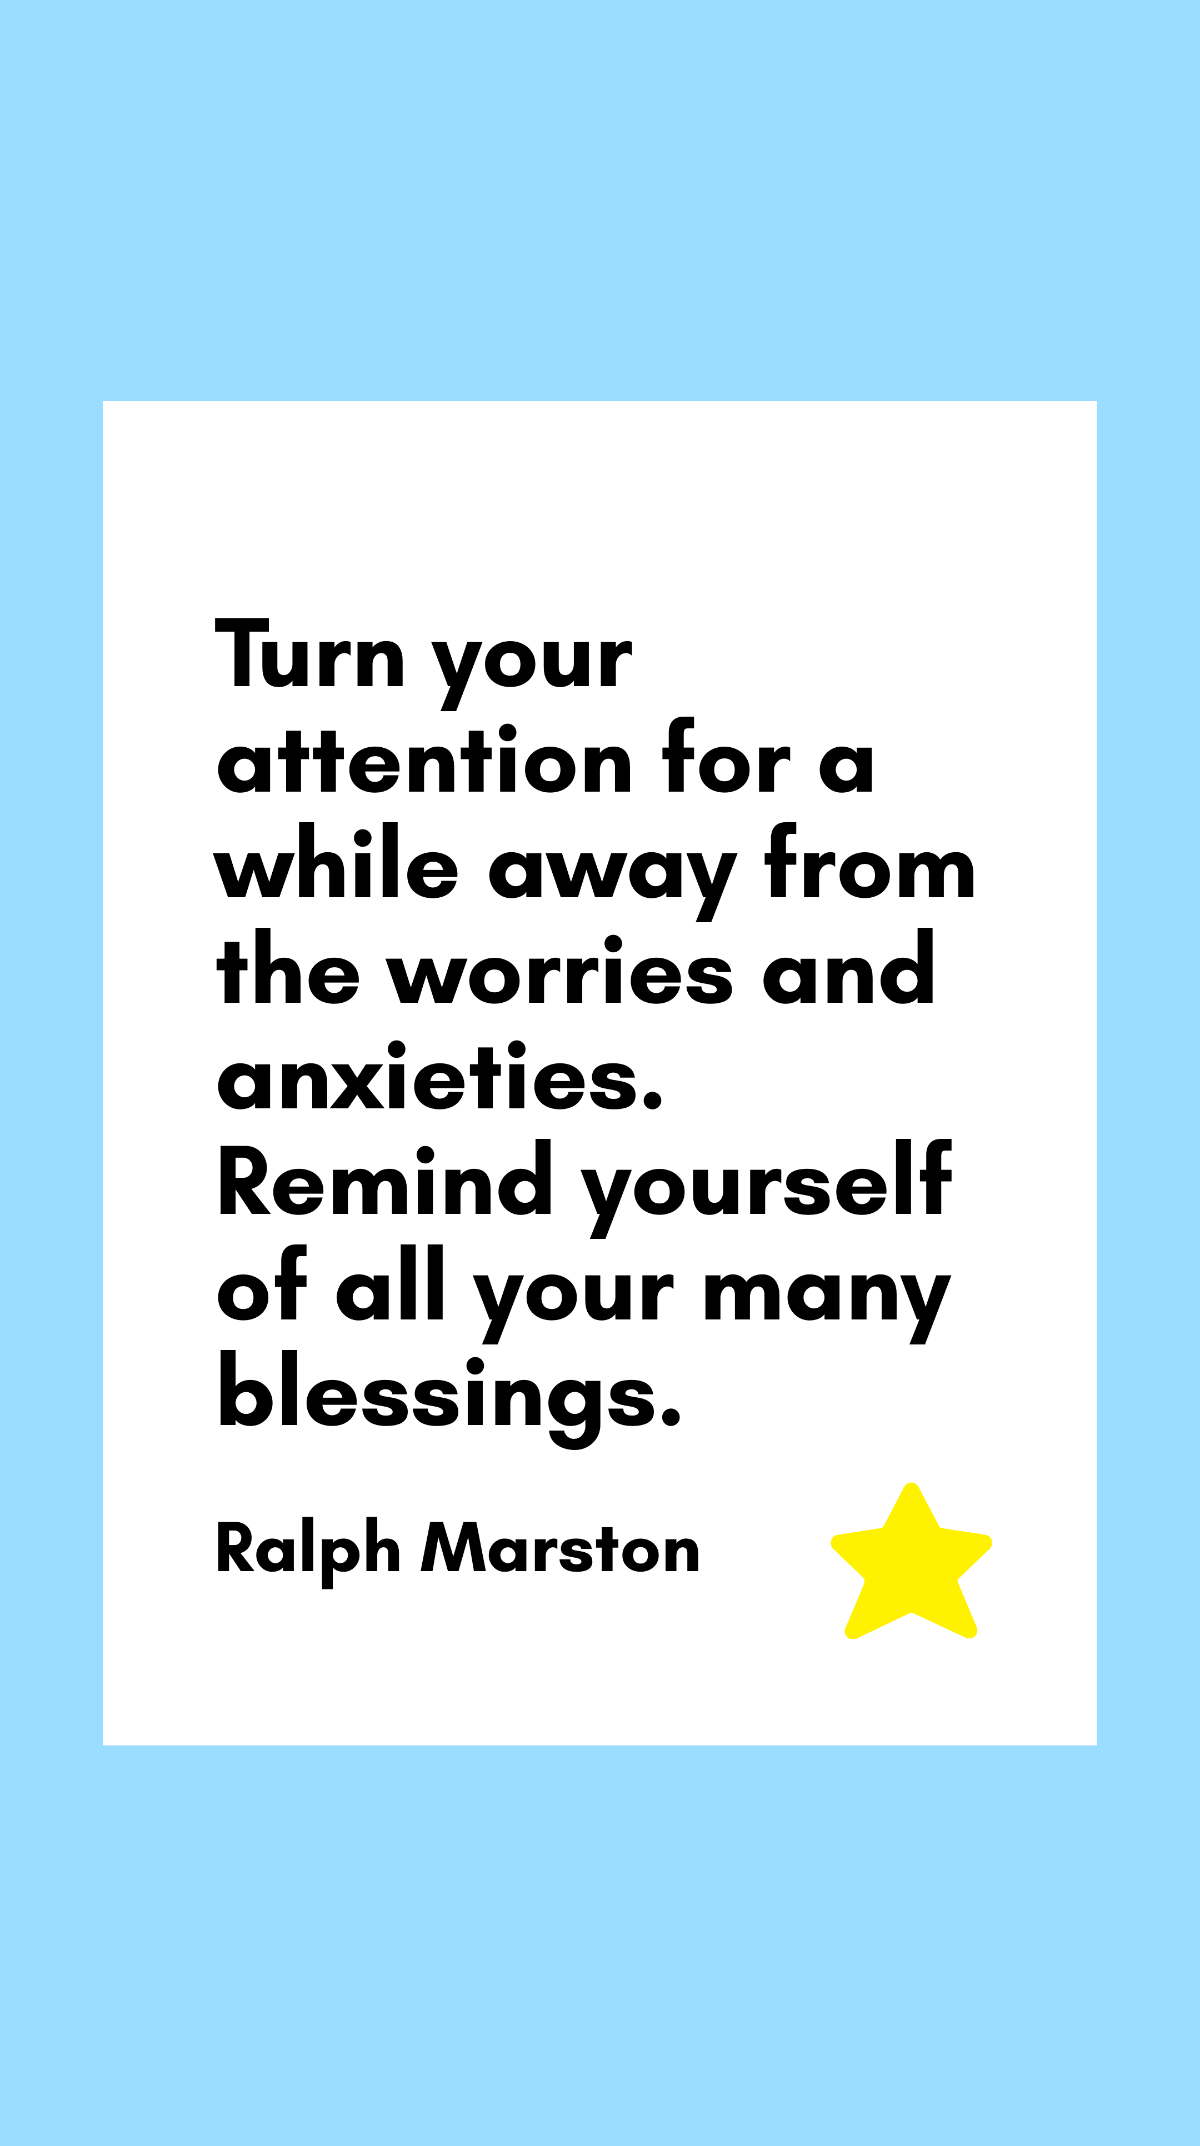 Free Ralph Marston - Turn your attention for a while away from the worries and anxieties. Remind yourself of all your many blessings. Template